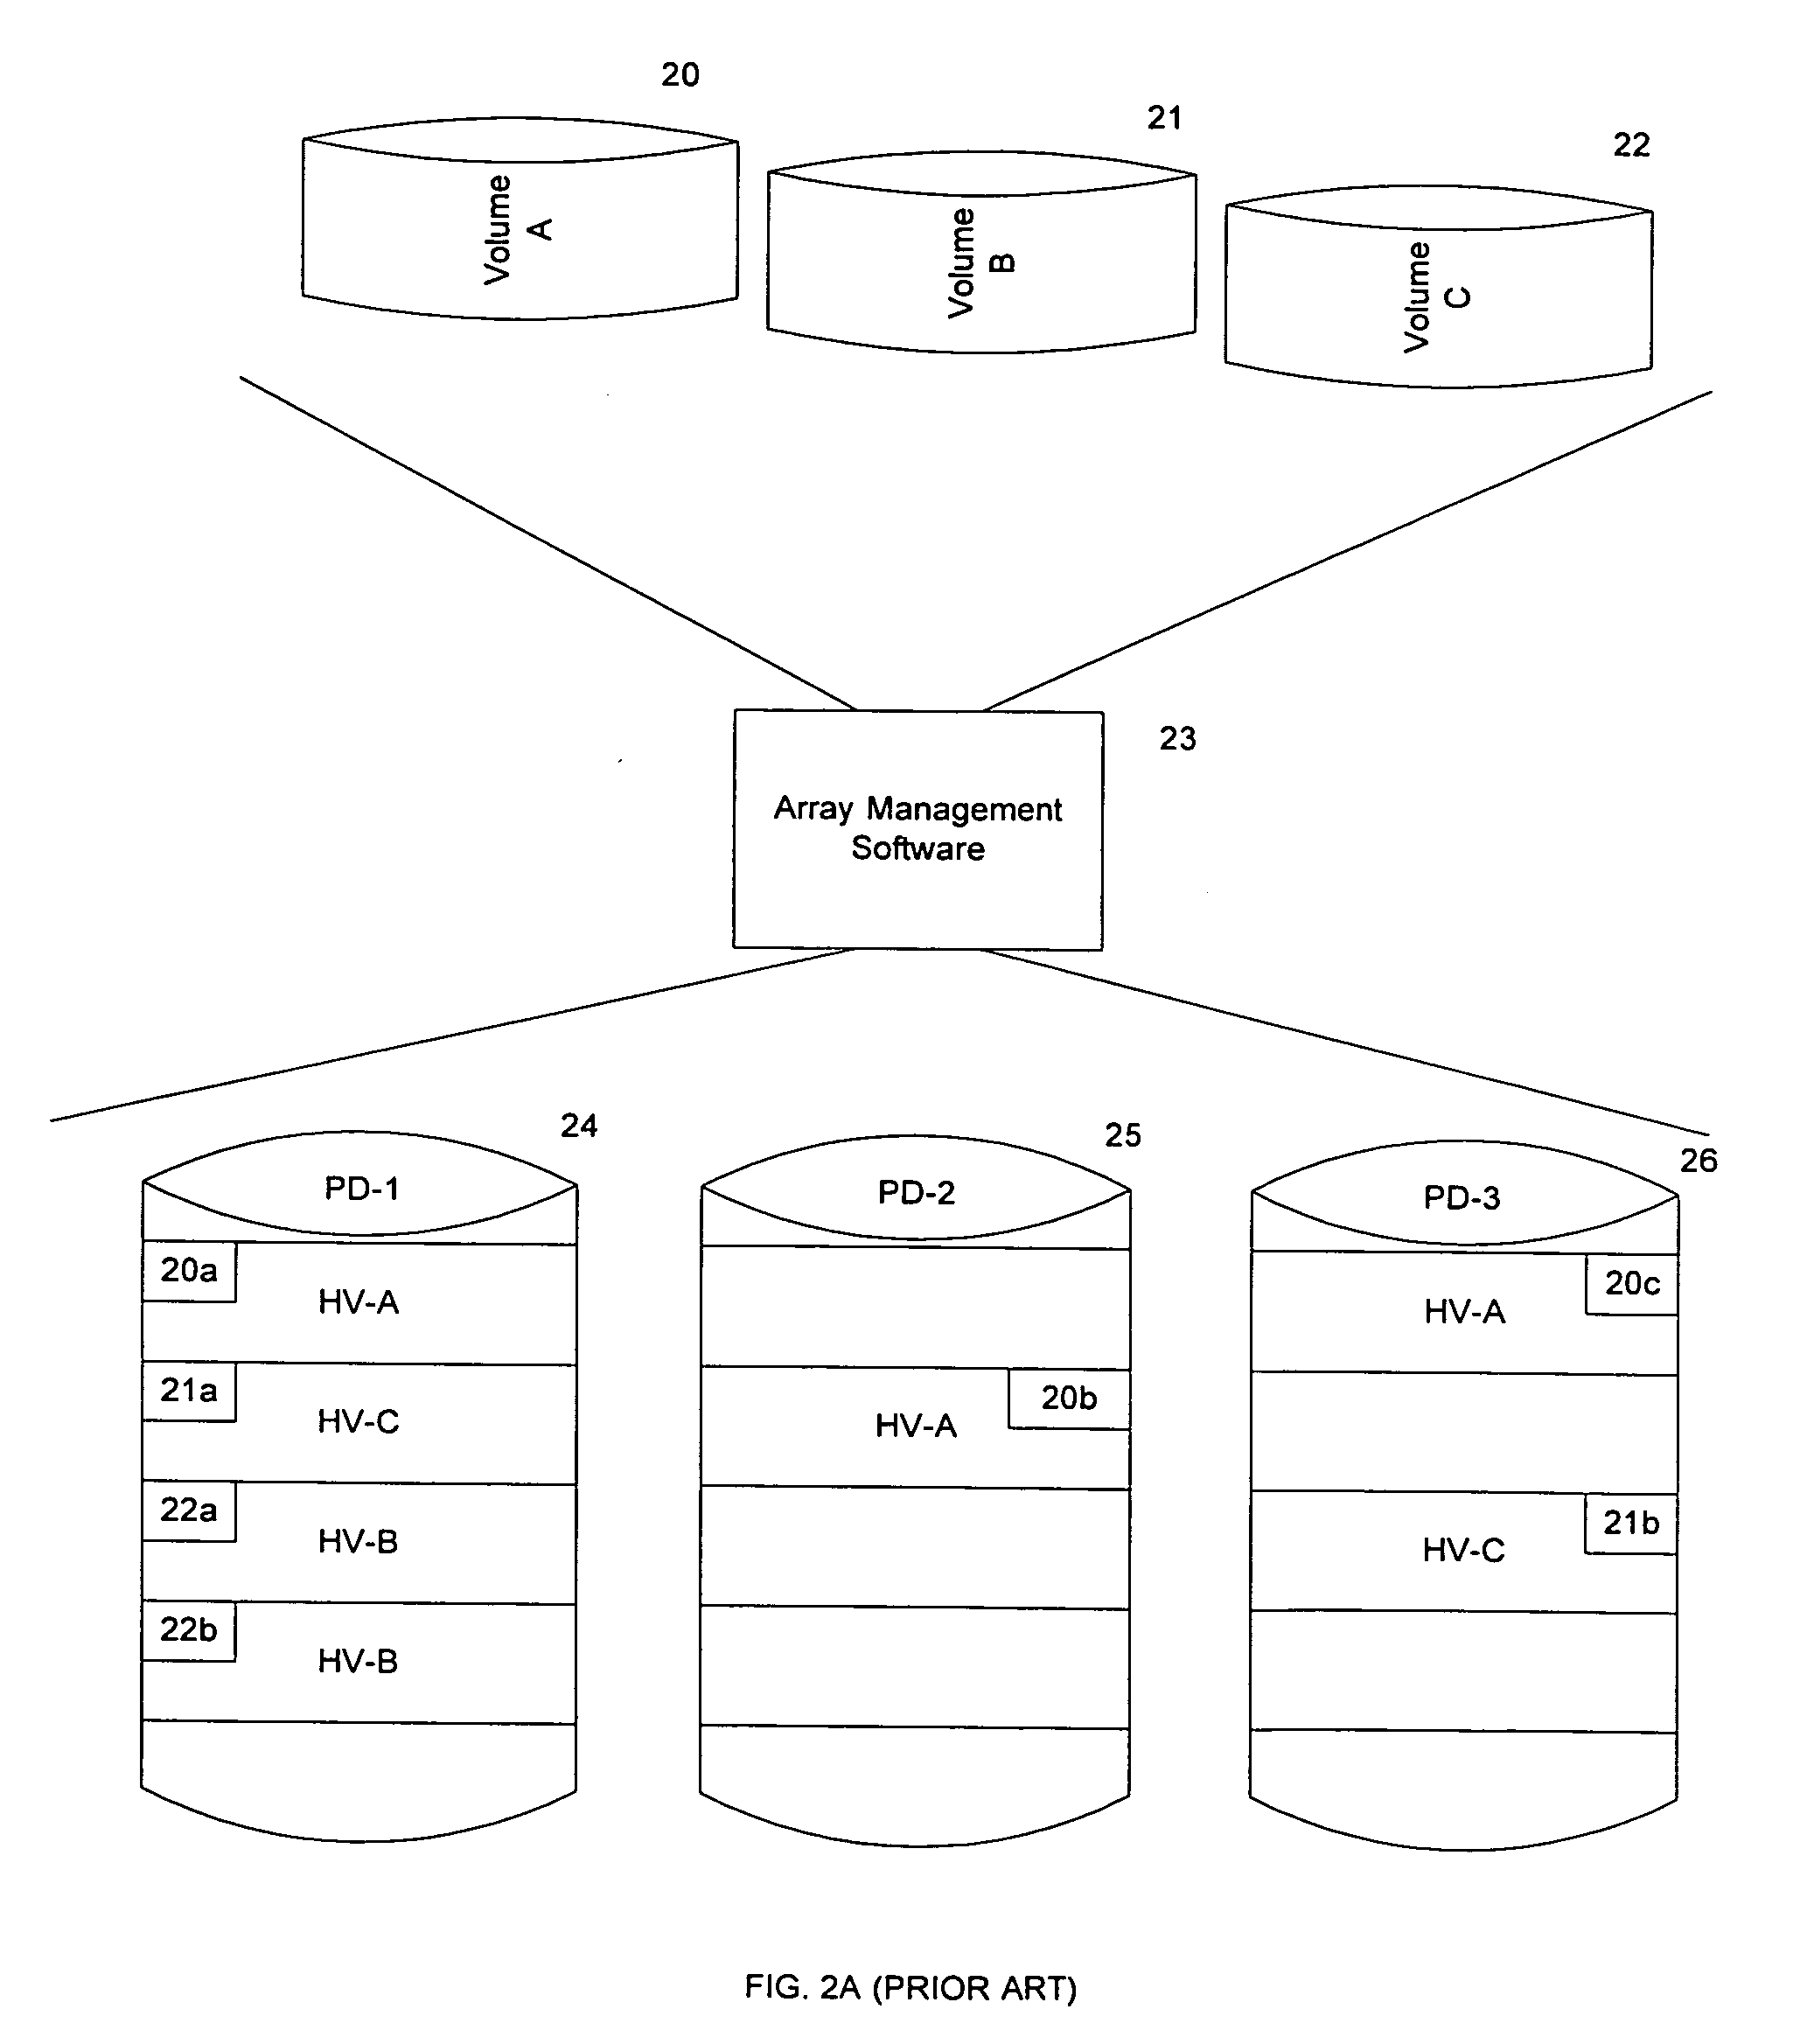 Apparatus and methods for operating a computer storage system